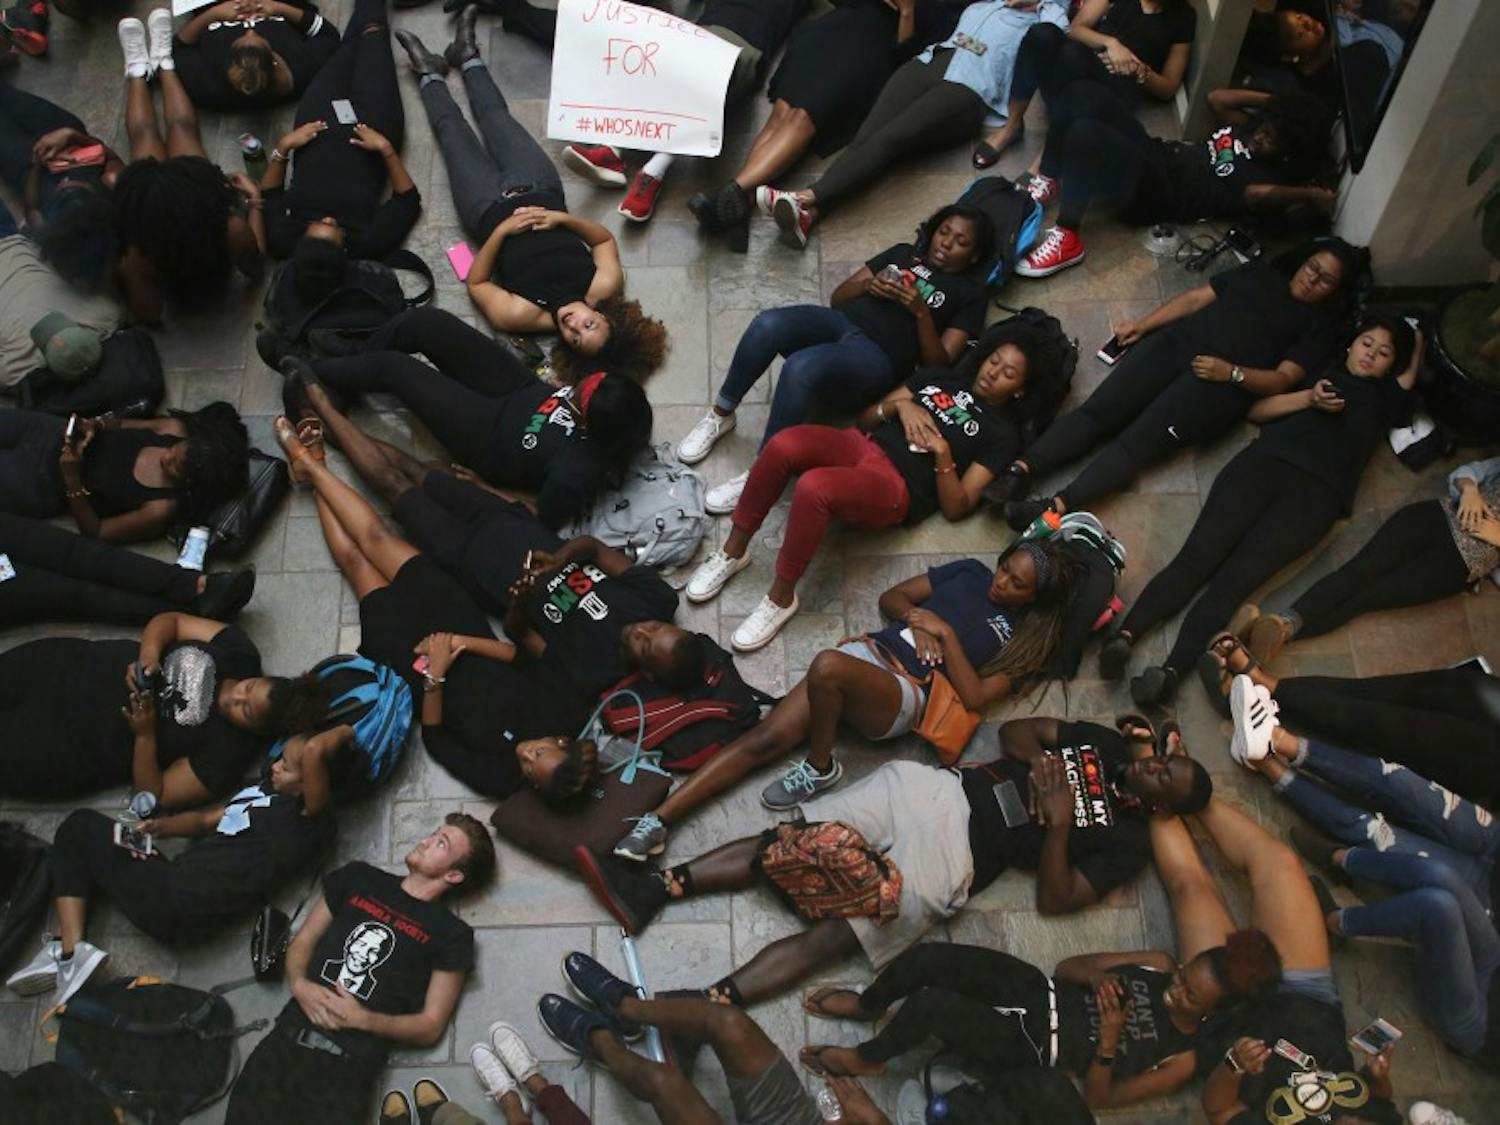 Students staged a die-in in the Student Union today in response to the demonstrations going on in Charlotte.